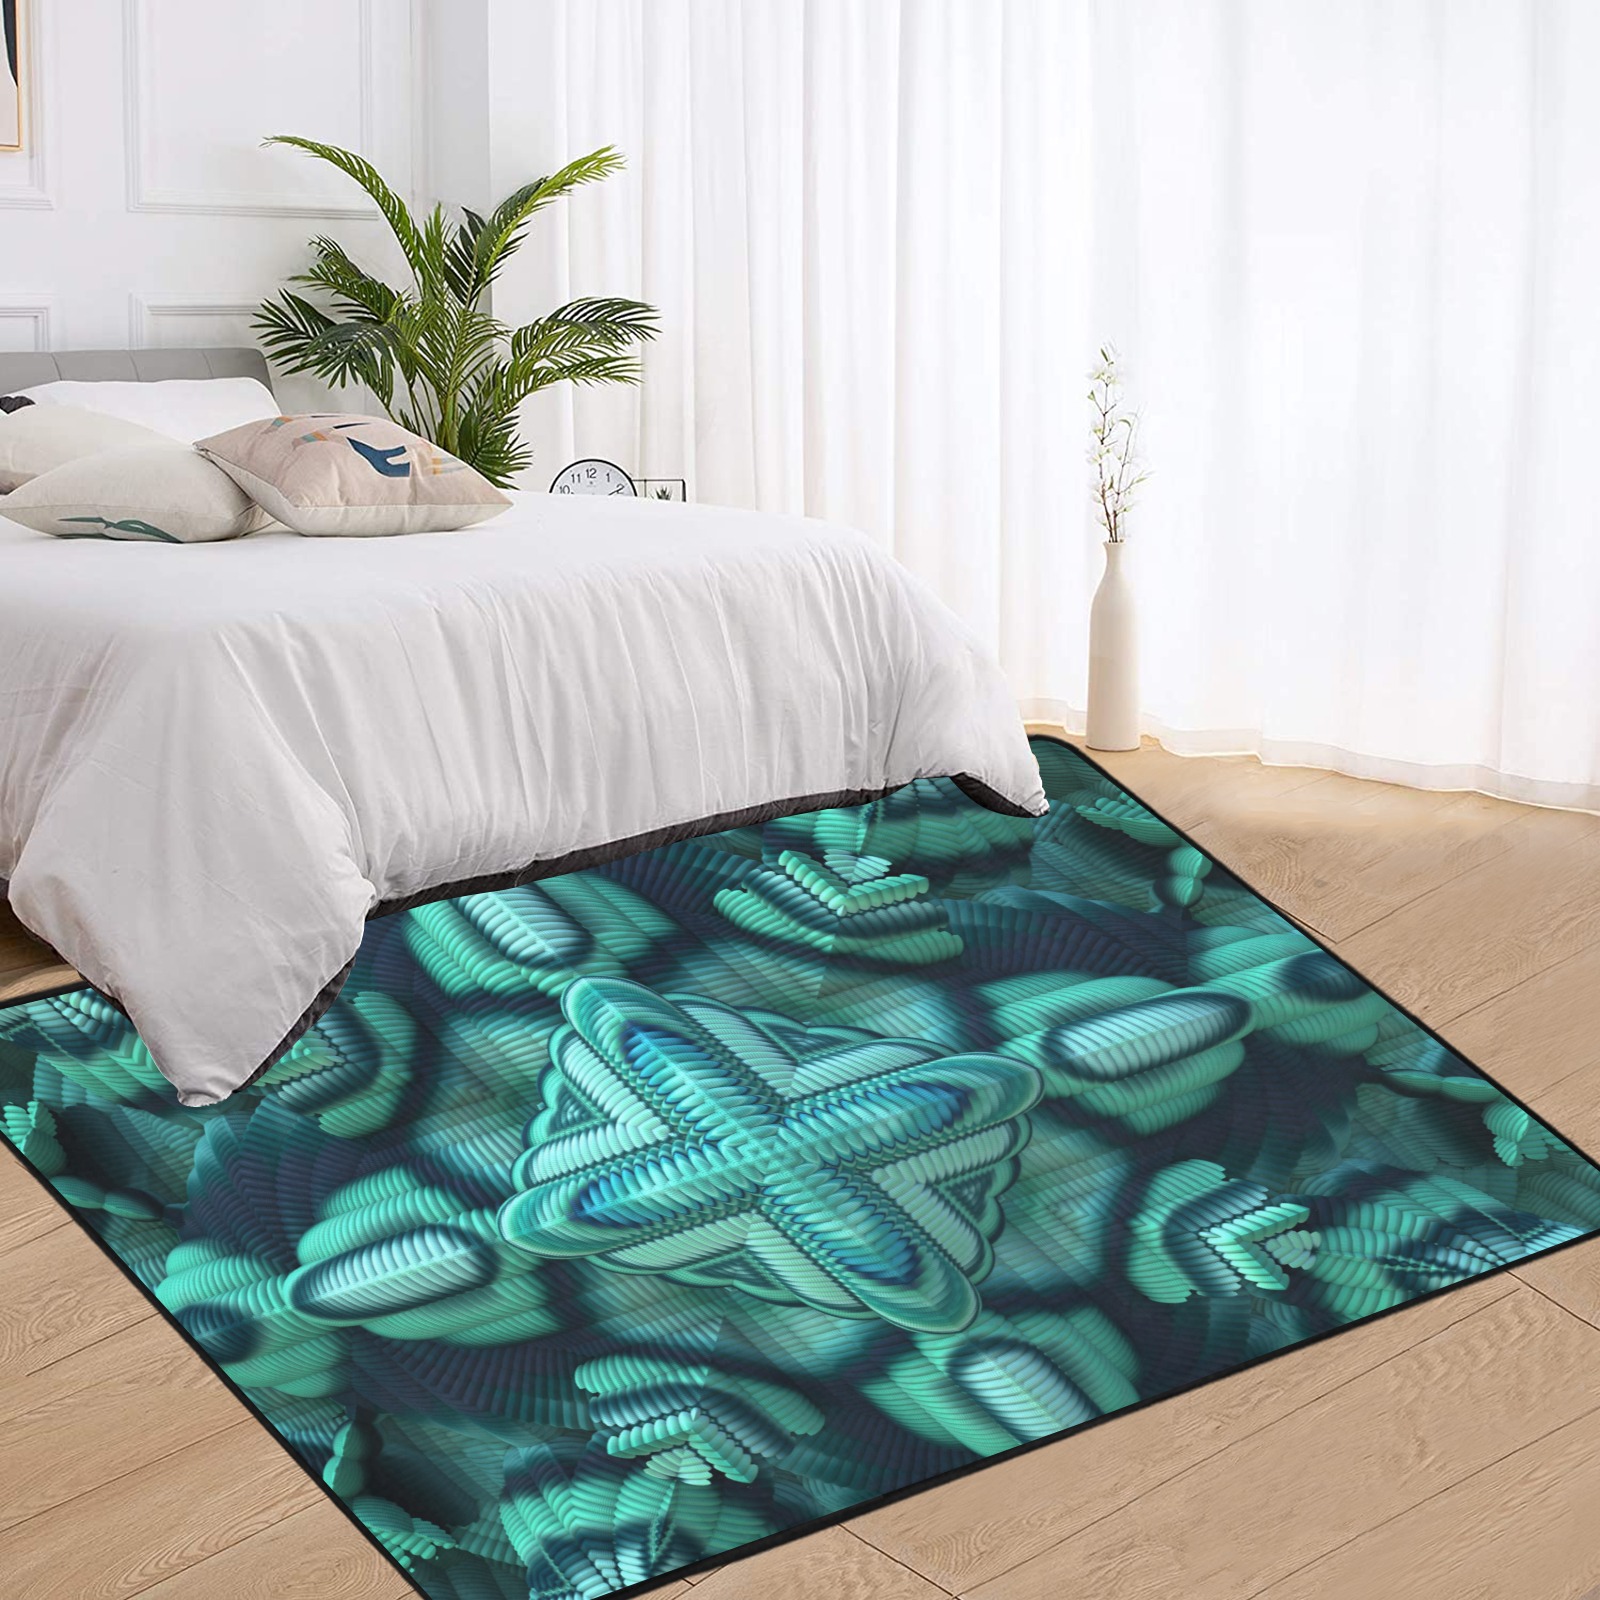 Cool Mint Area Rug with Black Binding 7'x5'